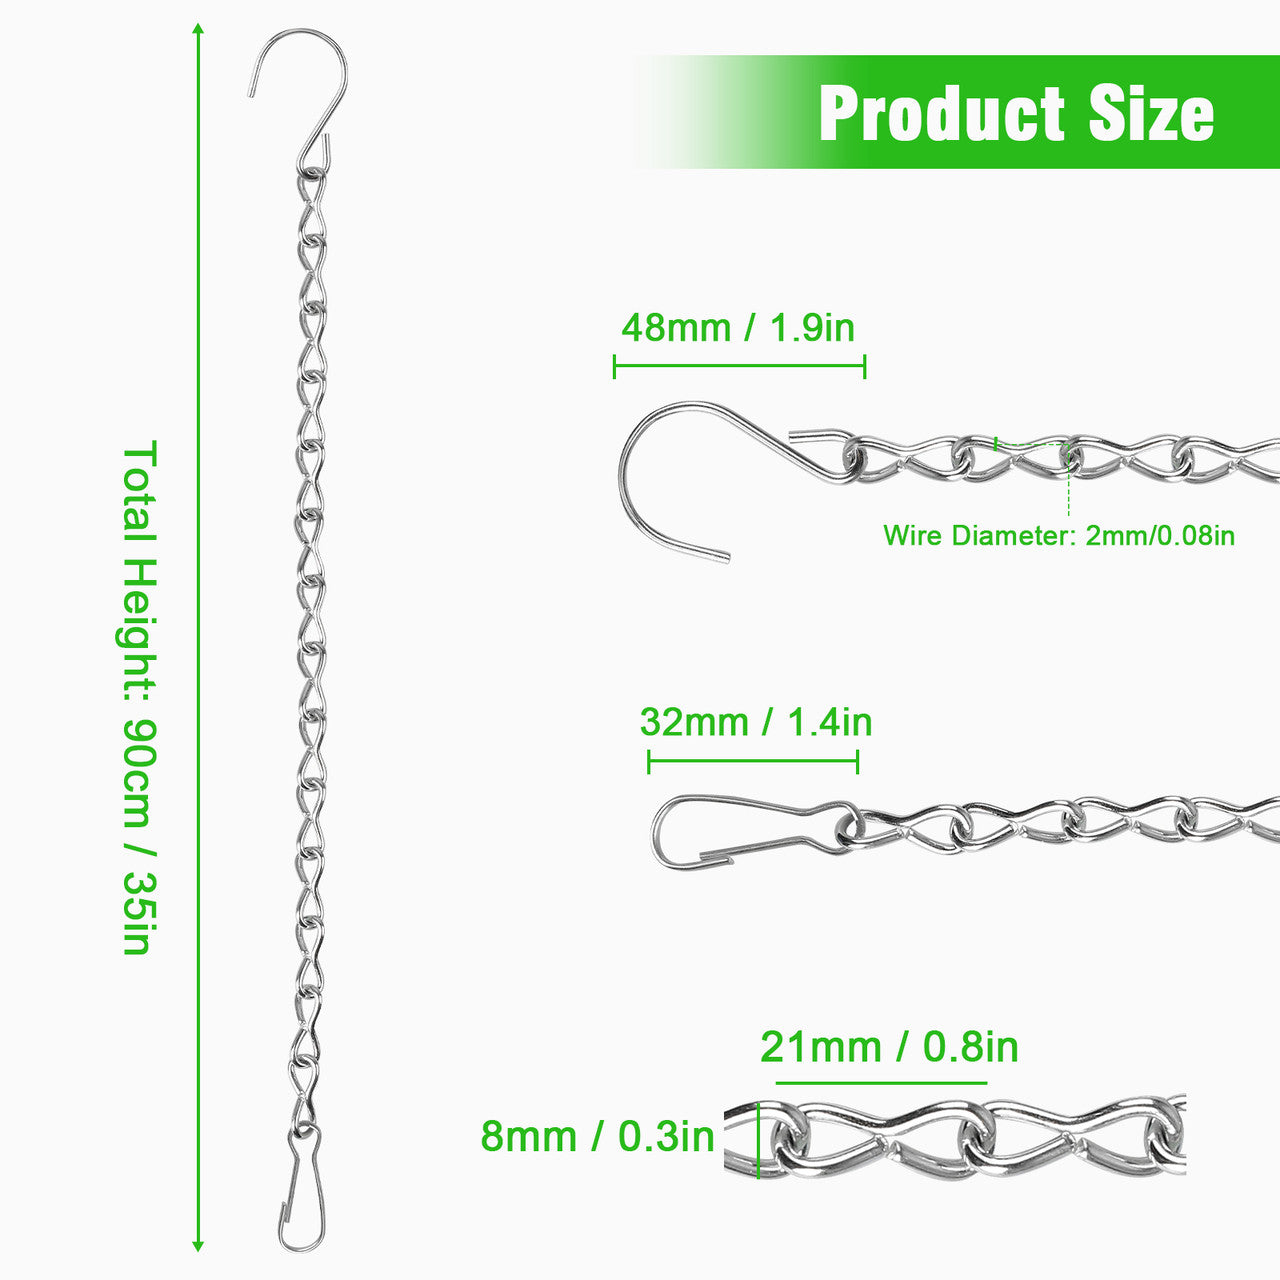 Hanging Chains for Flower pots and suitable for Home, Decor Outdoors, 2pcs